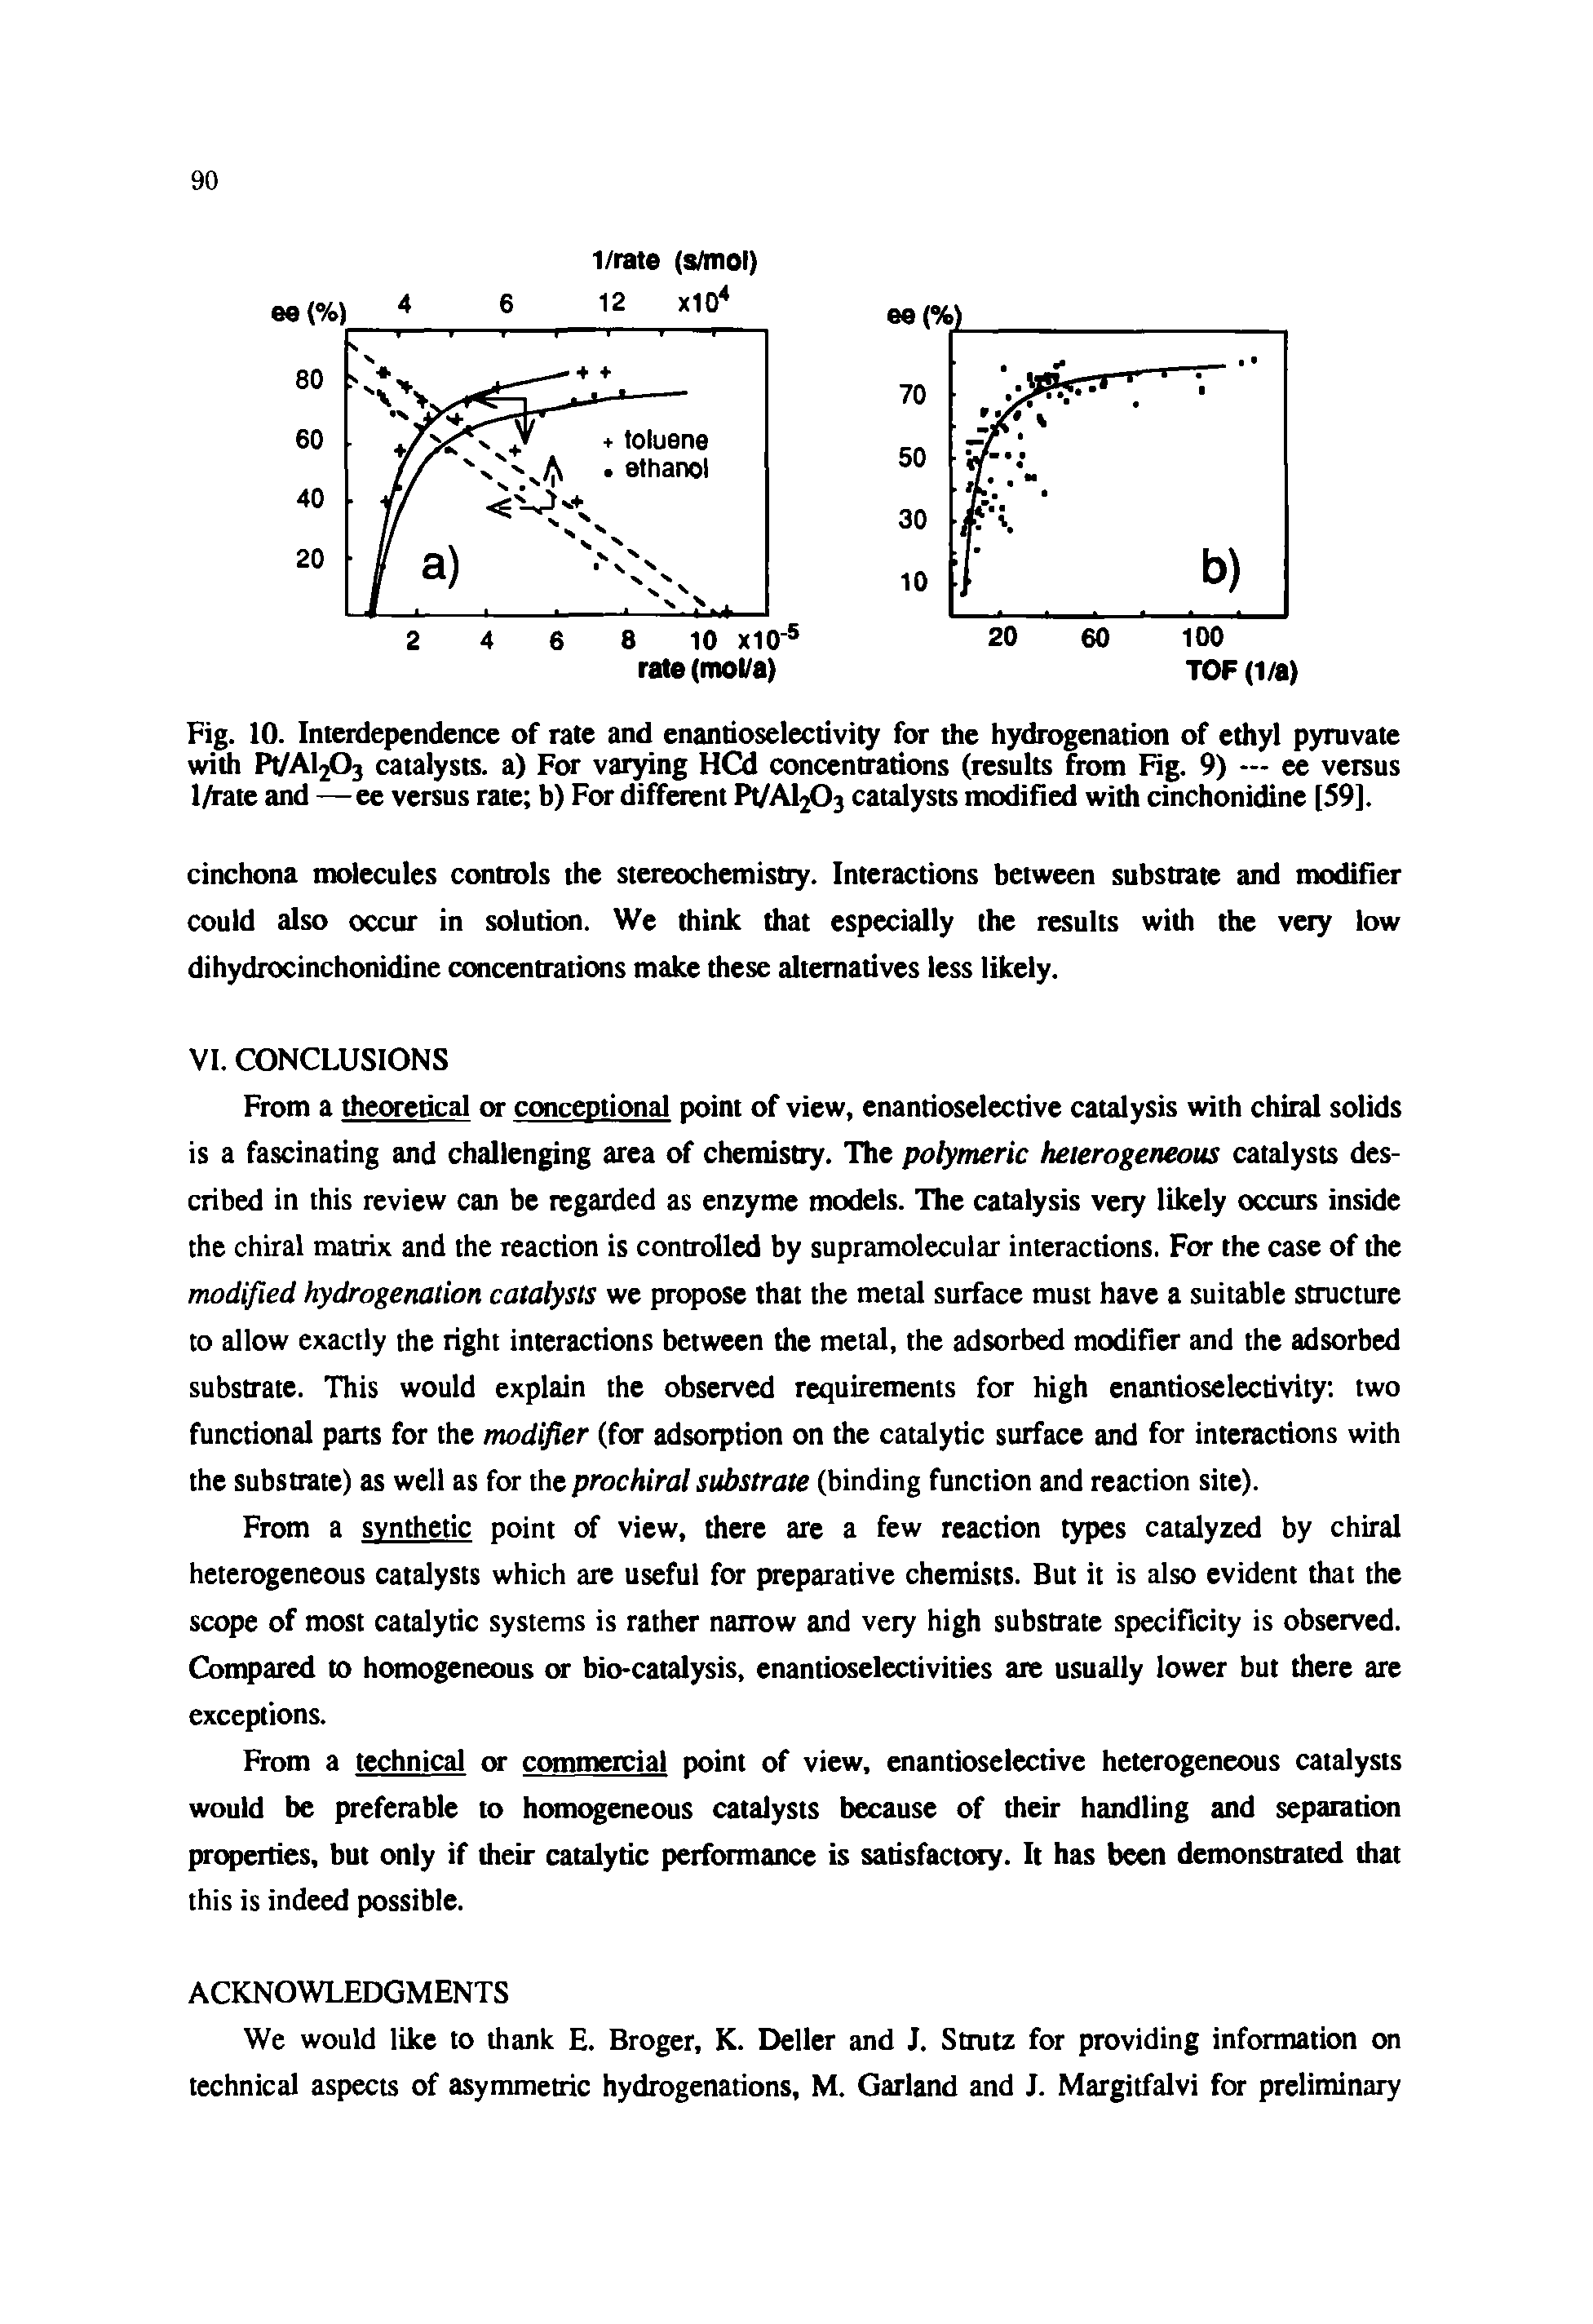 Fig. 10. Interdependence of rate and enandoselectivity for the hydrogenation of ethyl pyruvate with Pt/Al203 catalysts, a) For varying HCd concentrations (results from Fig. 9) — ee versus 1/rate and —ee versus rate b) For different Pt/AljOj catalysts modified with cinchonidine [59].